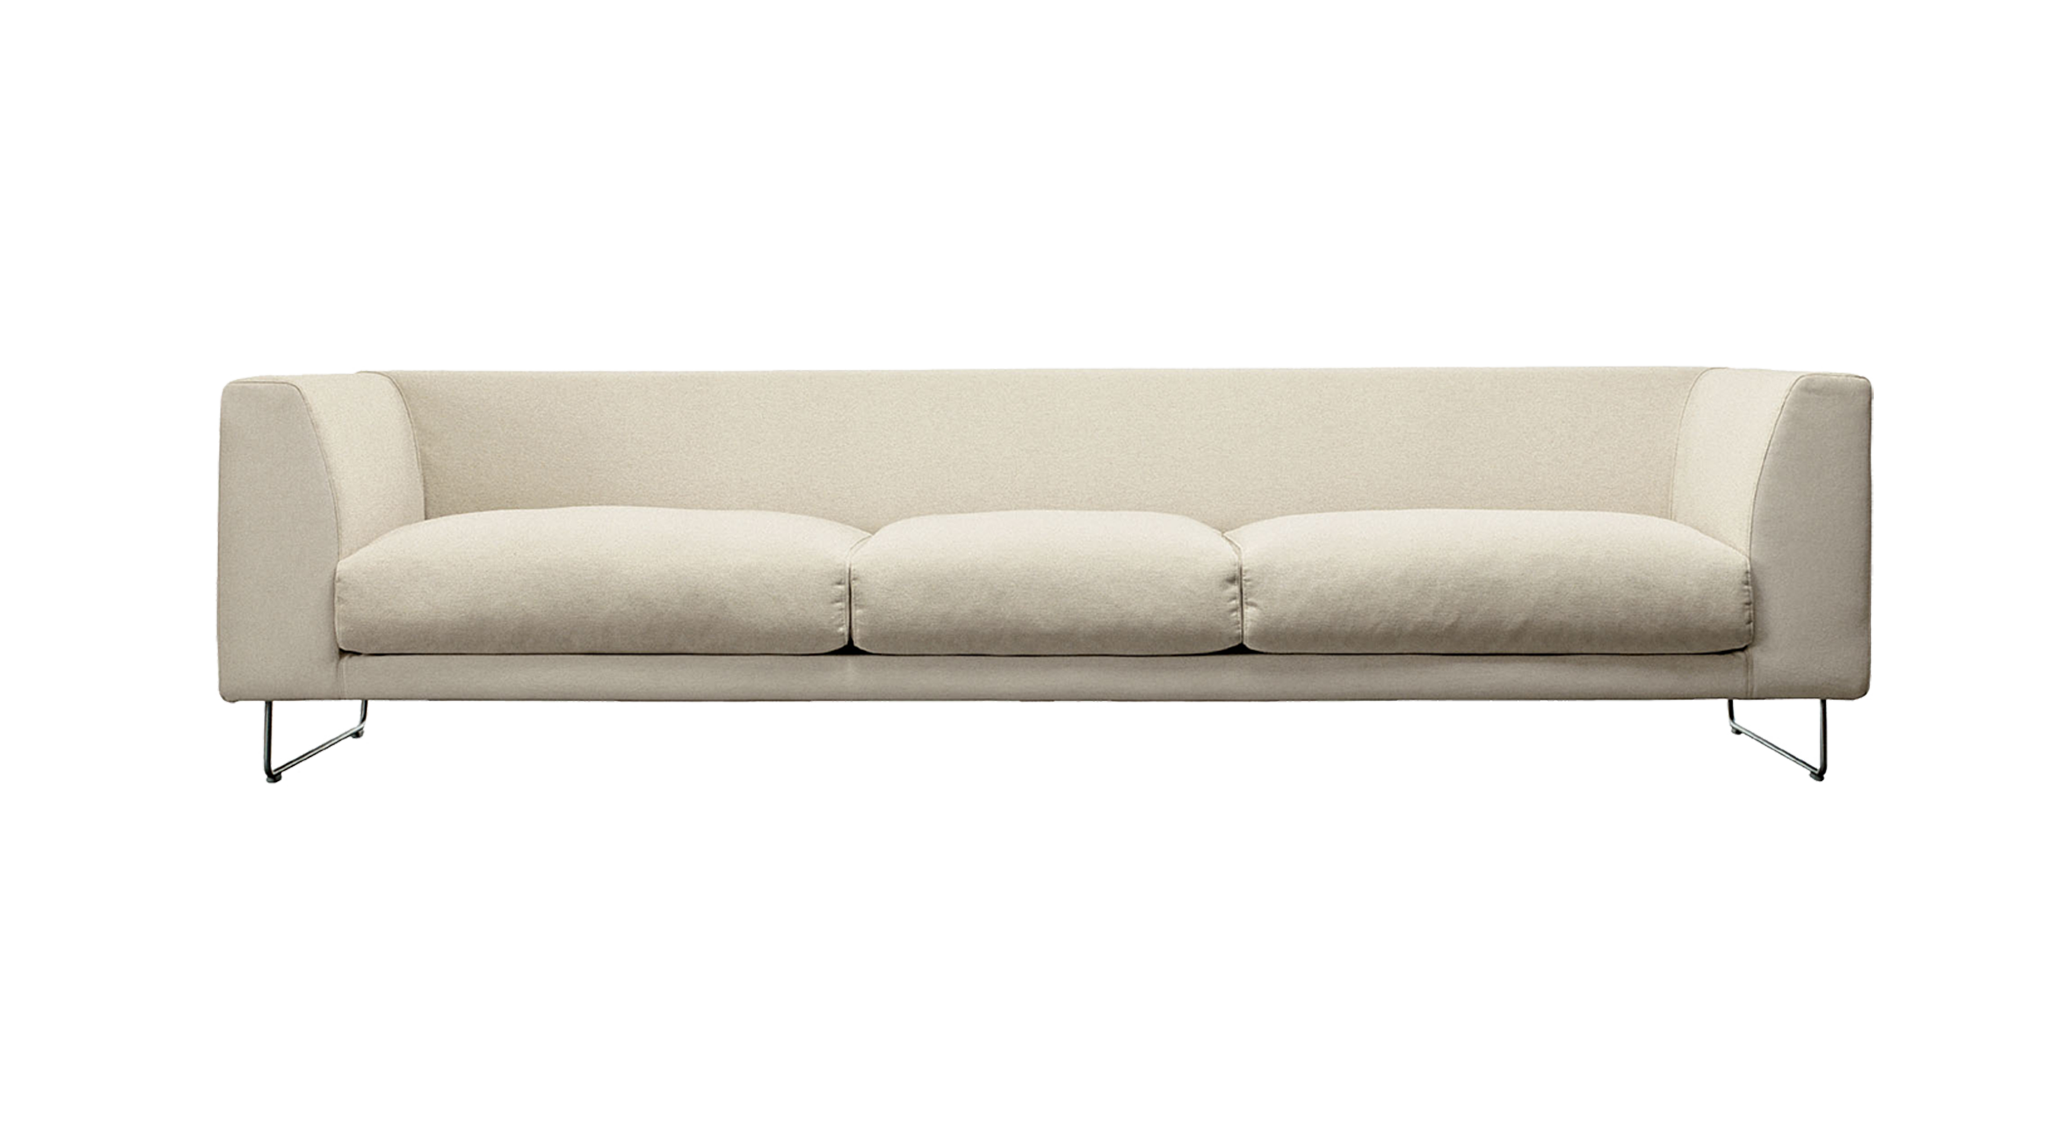 Couch PNG Image in Transparent #55700 1900x1250 Pixel | pngteam.com